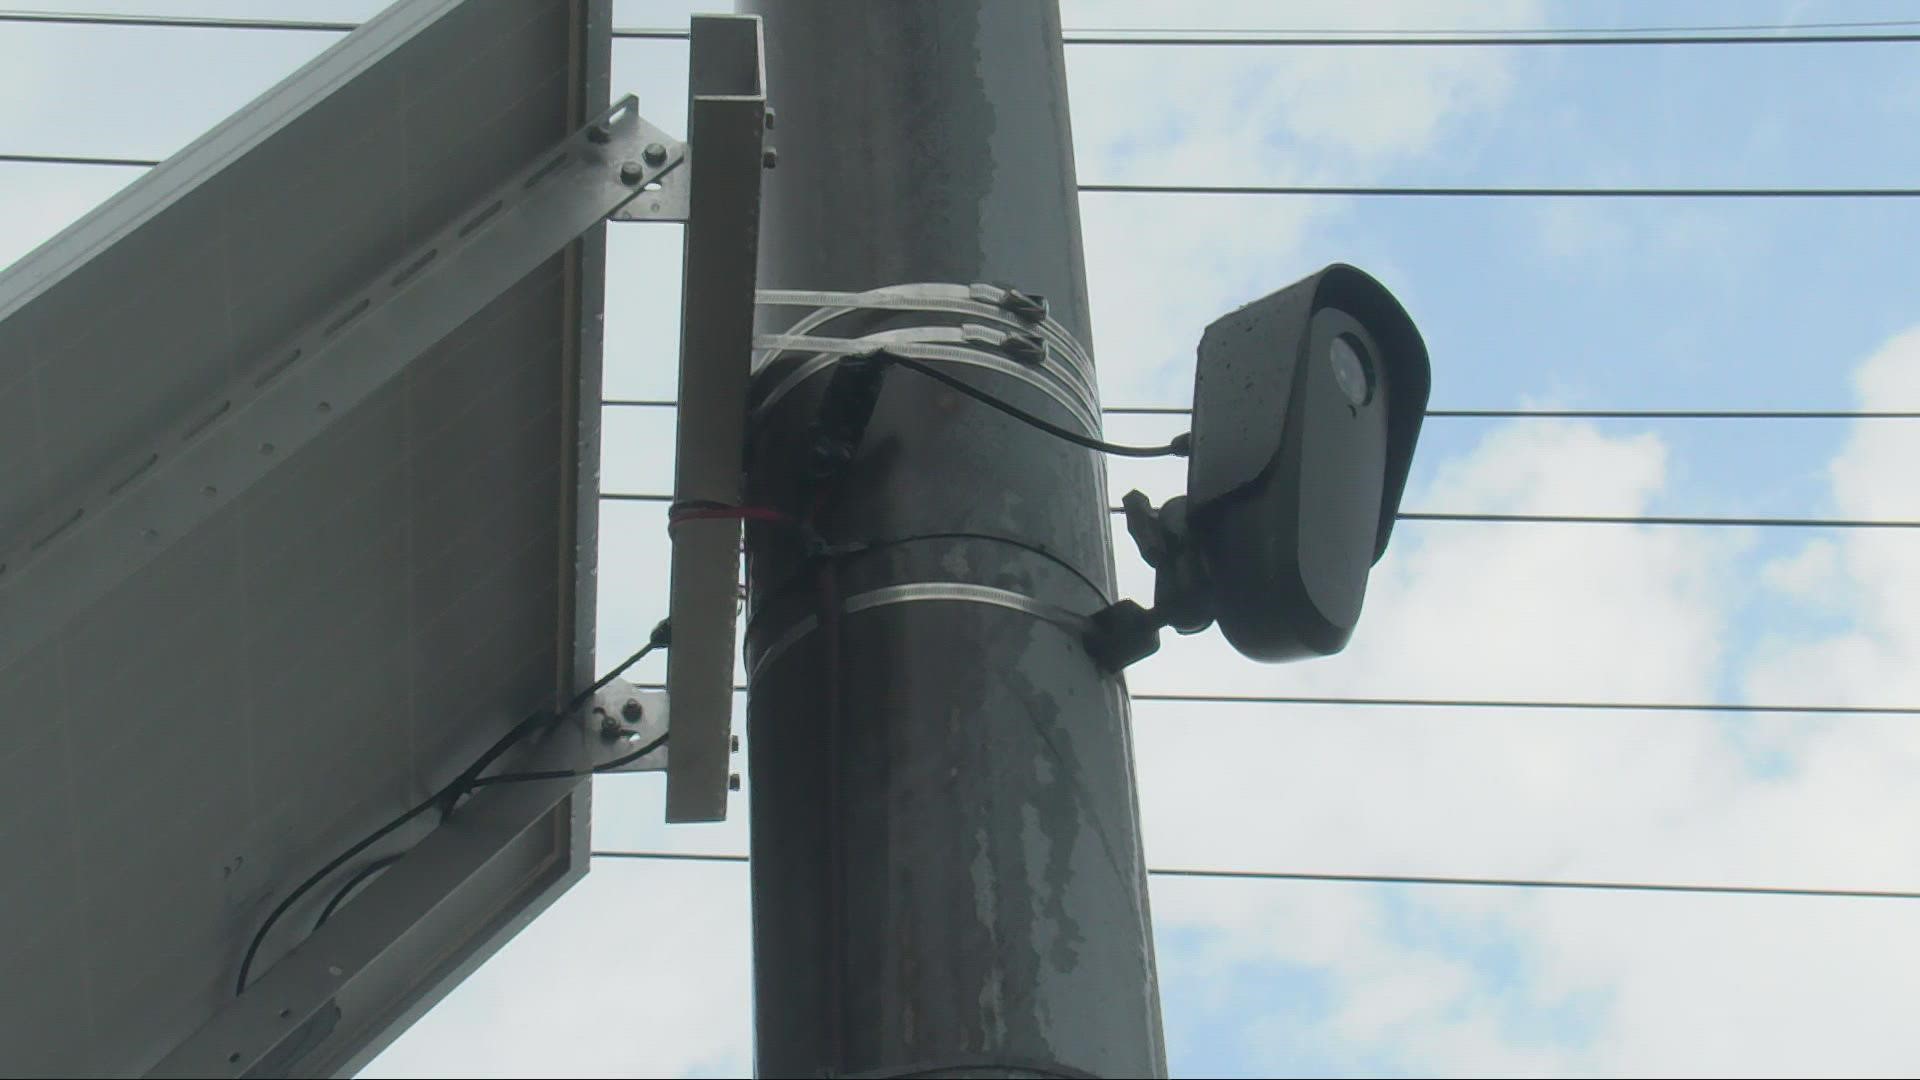 License plate readers are used by police departments to help solve crimes from finding stolen cars to proving a suspect was nearby when a crime happens.